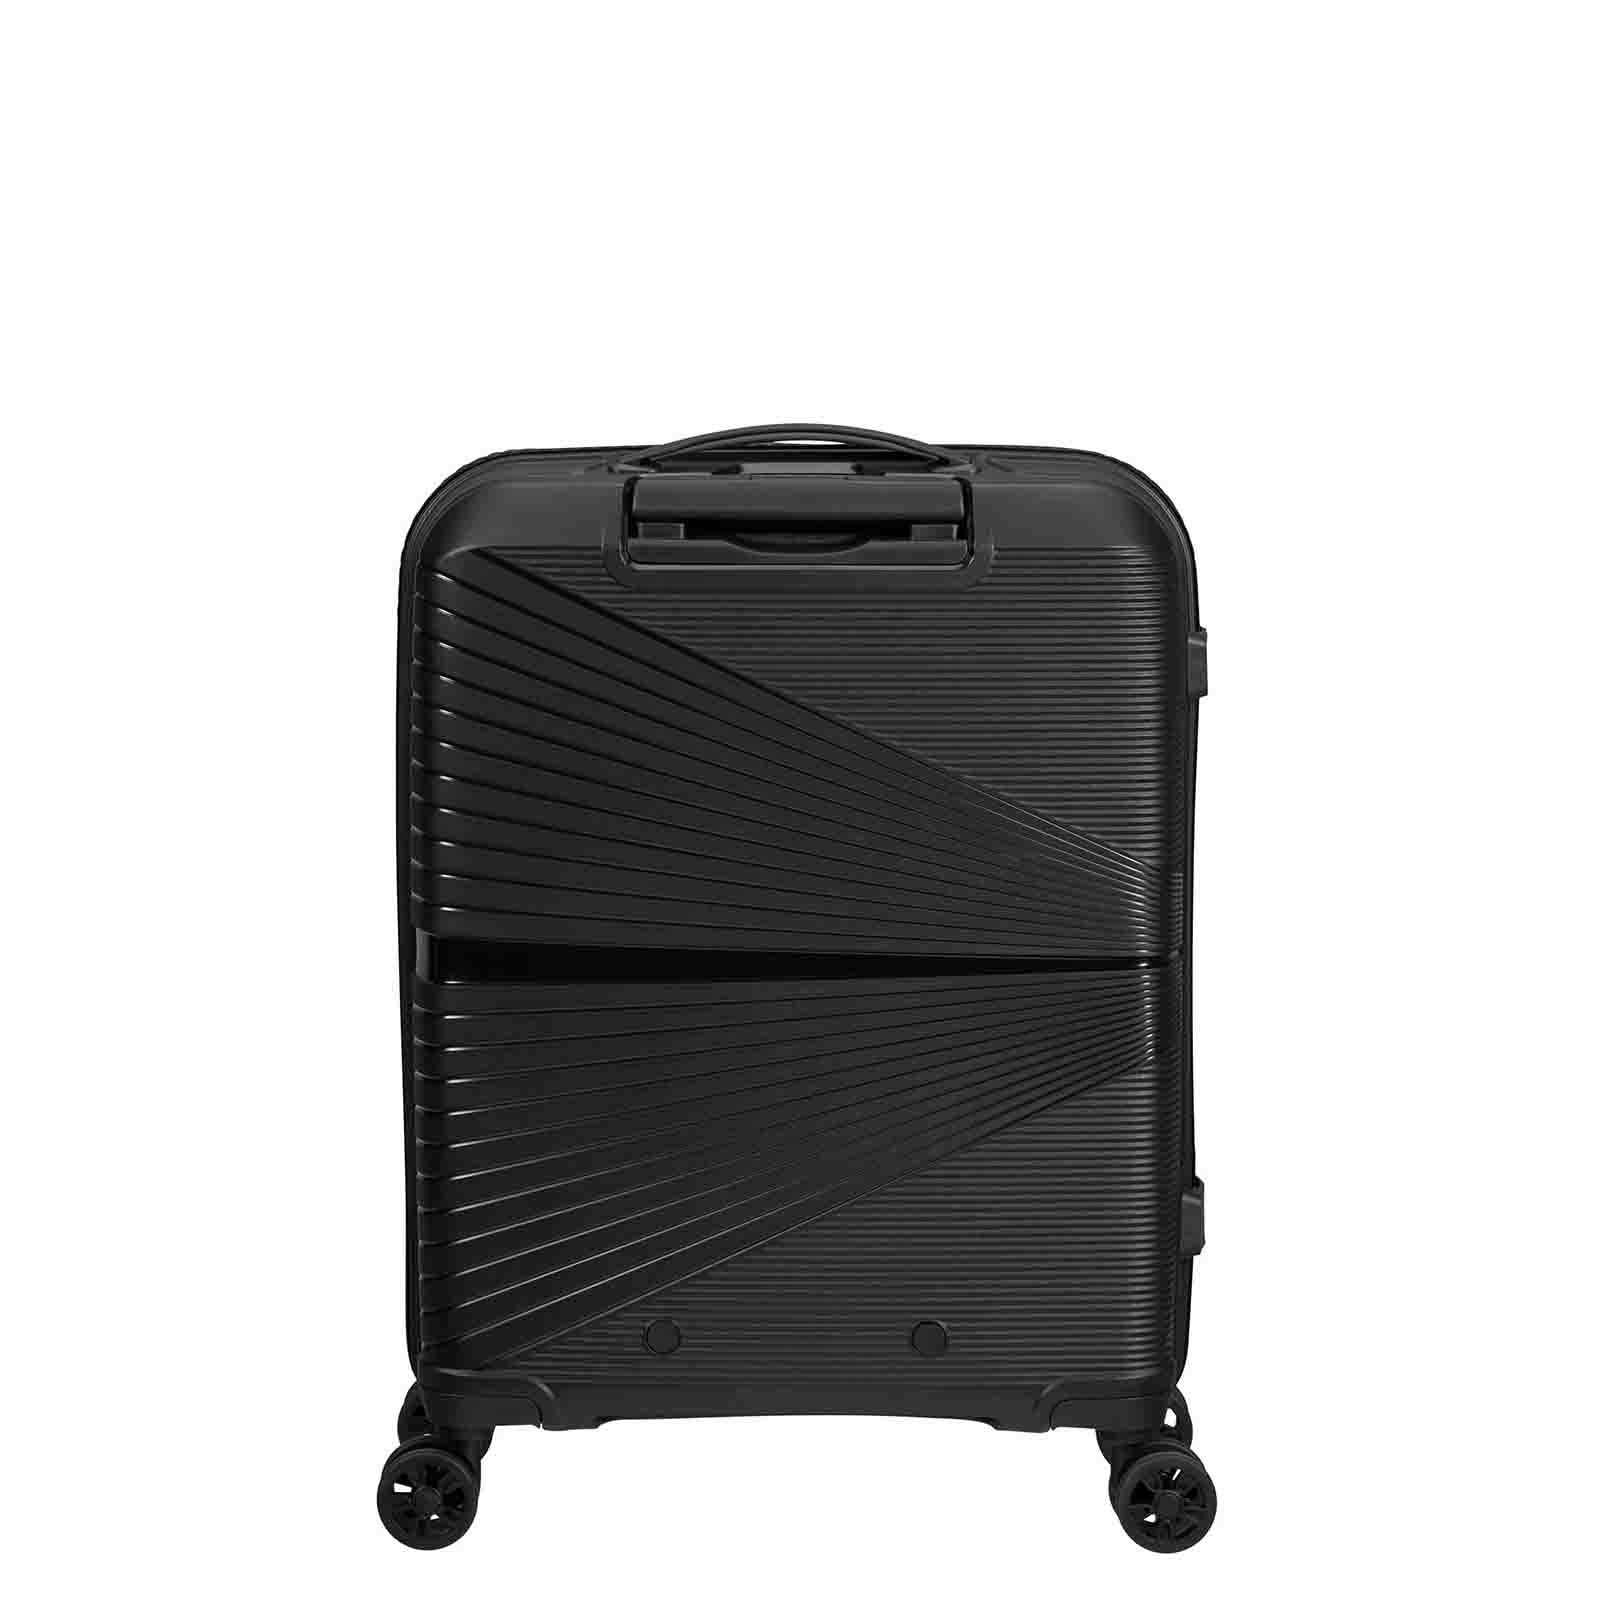 American-Tourister-Airconic-55cm-Suitcase-Front-Opening-Onyx-Black-Back